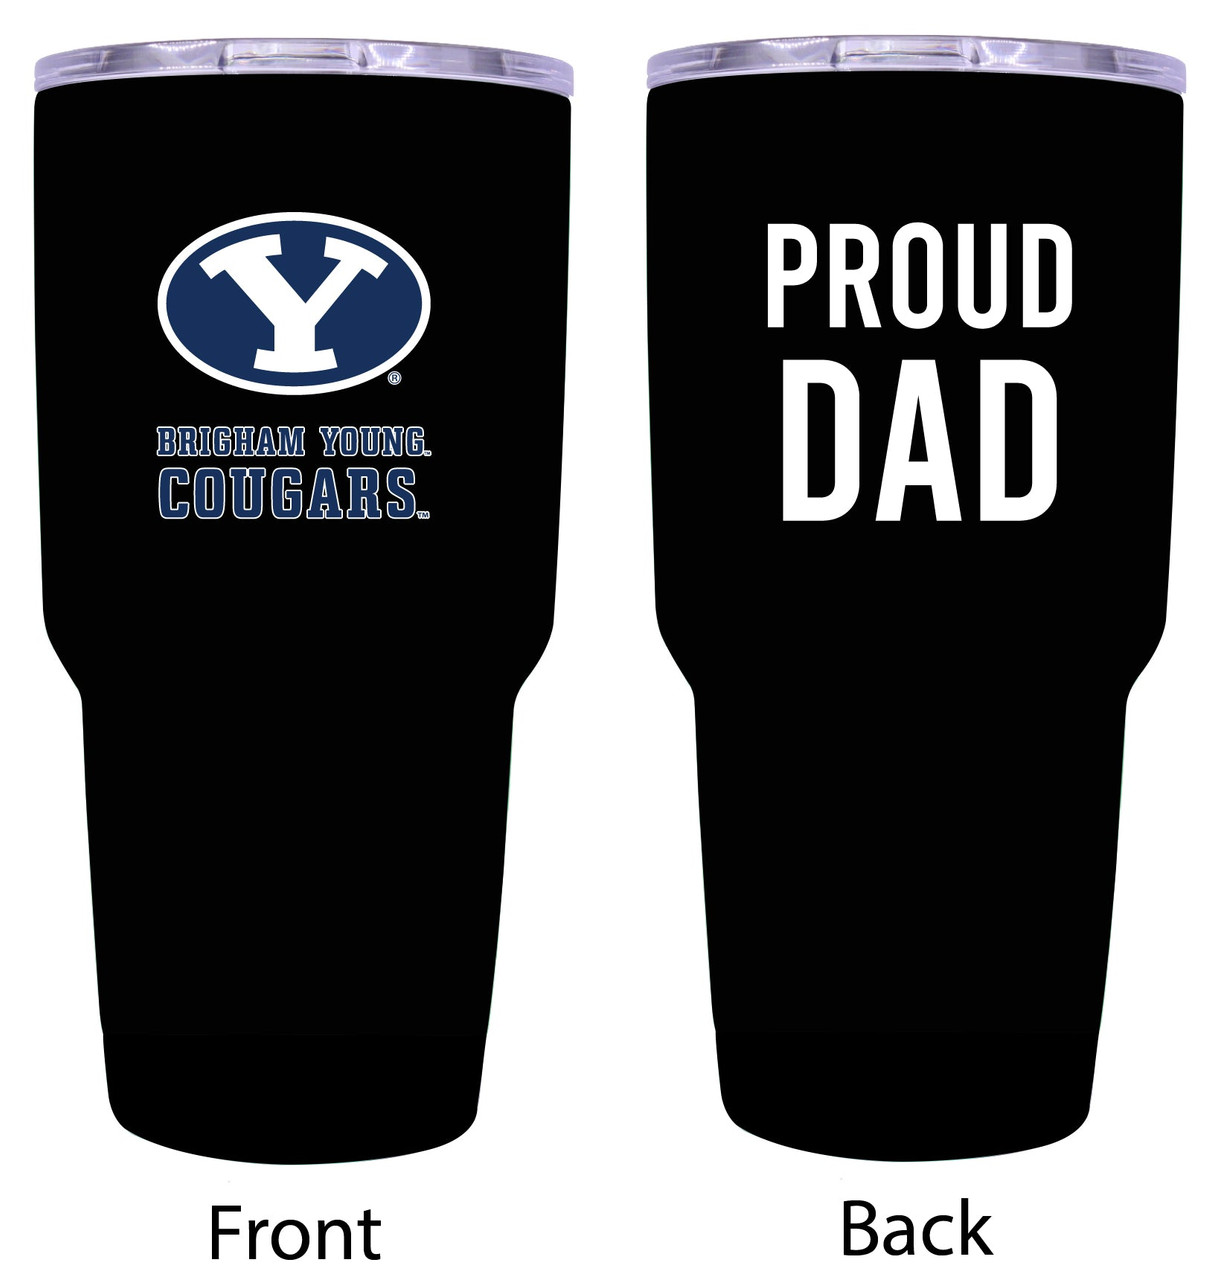 Brigham Young Cougars Proud Dad 24 oz Insulated Stainless Steel Tumblers Choose Your Color.